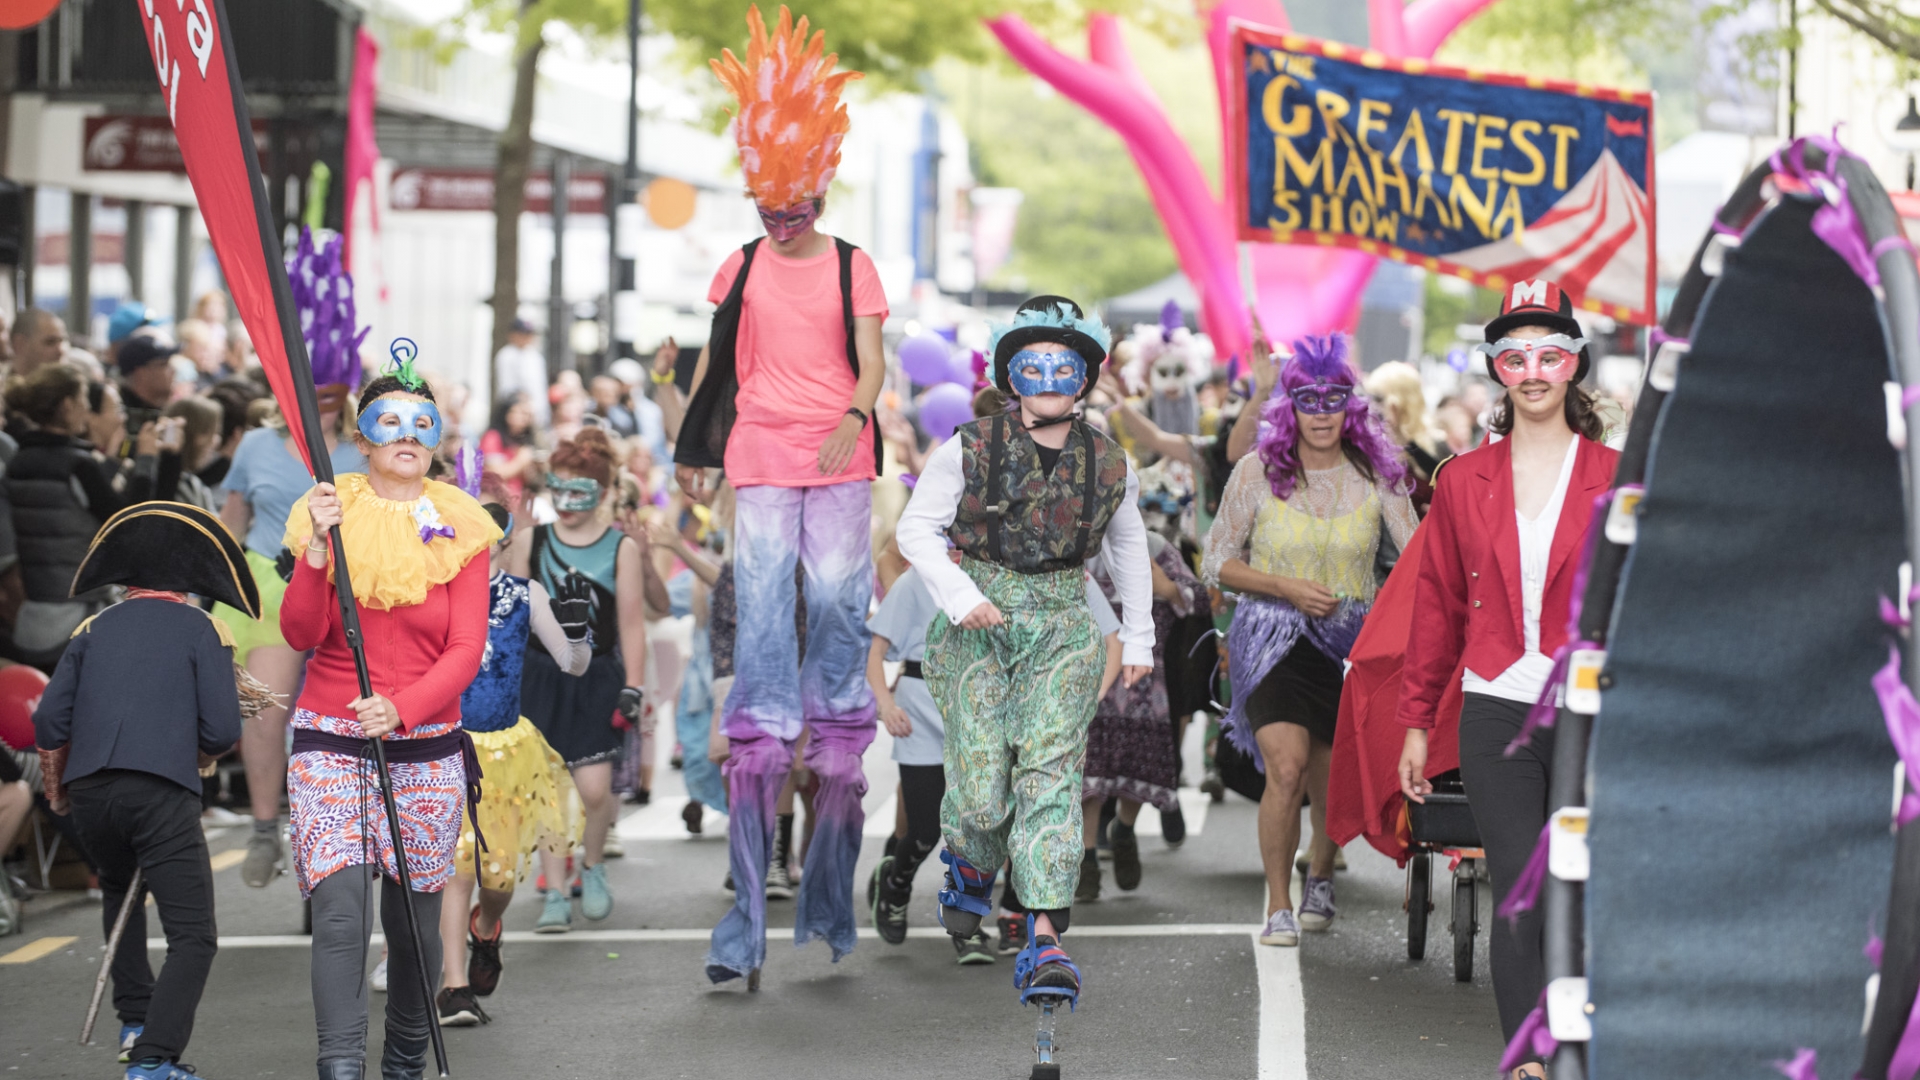 The Masked Parade was a popular event at the 2018 Nelson Arts Festival. Photo: Steve Hussey Photography.